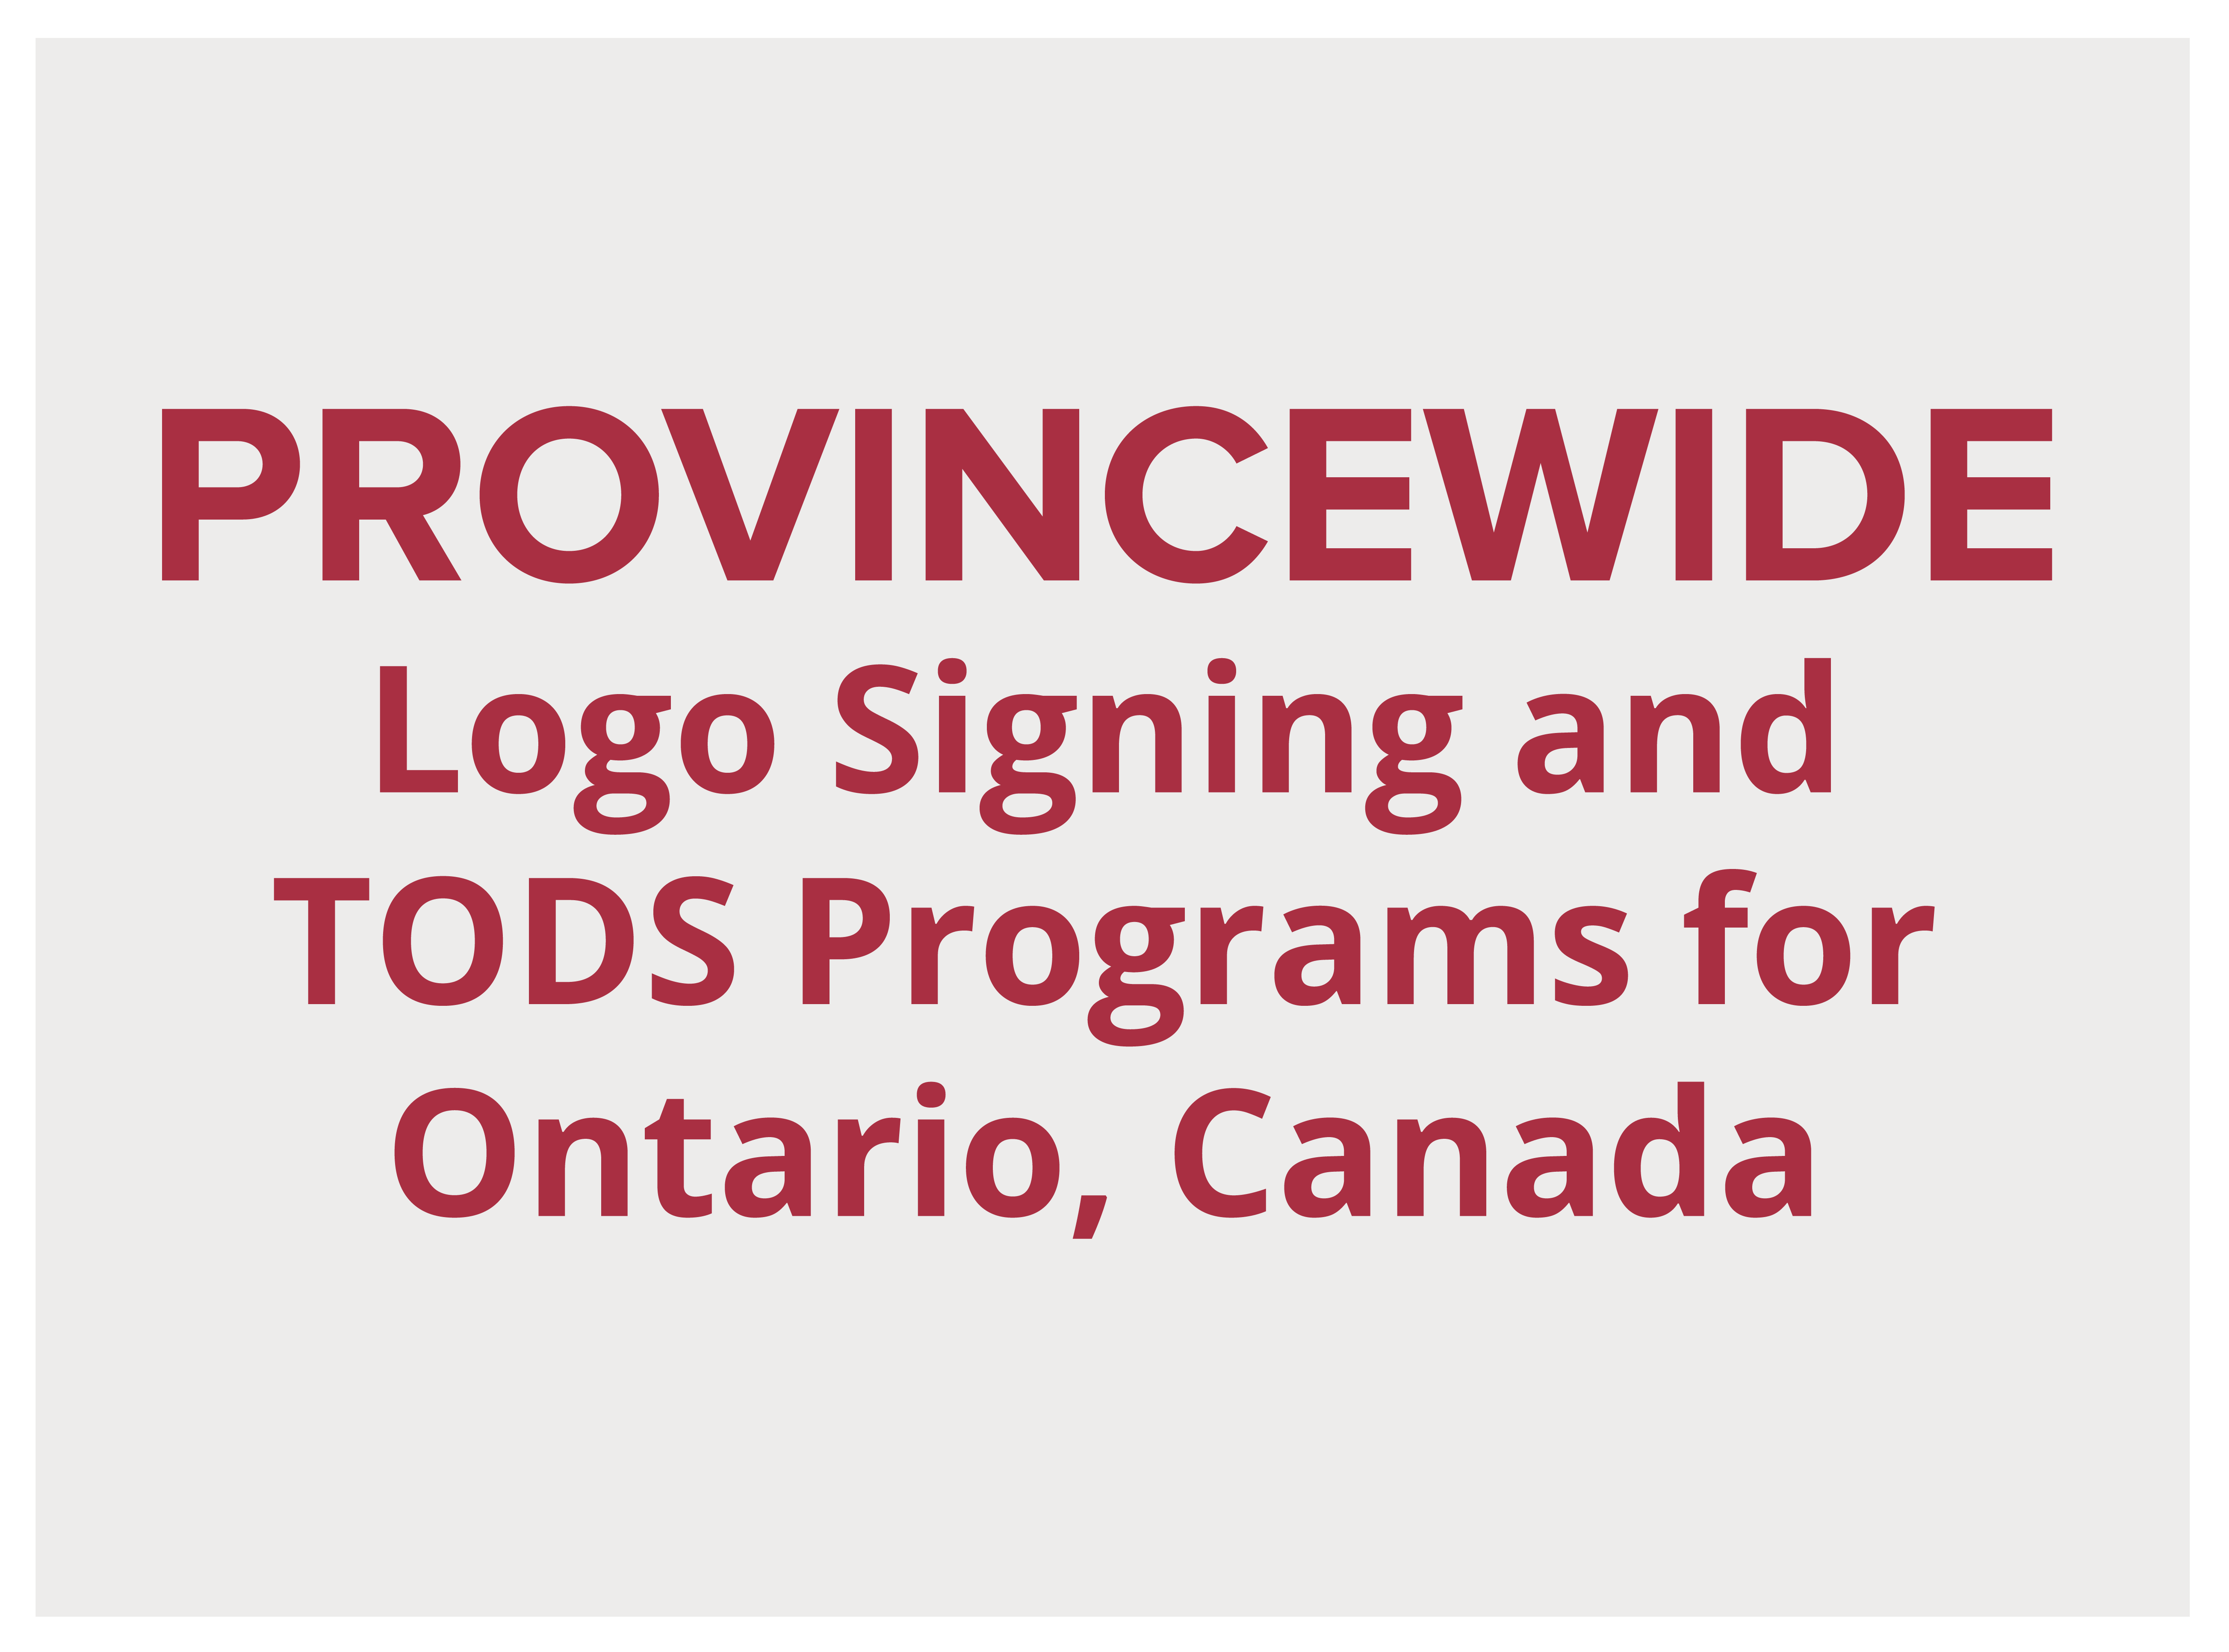 Provincewide Logo Signing and TODS Programs for Ontario, Canada